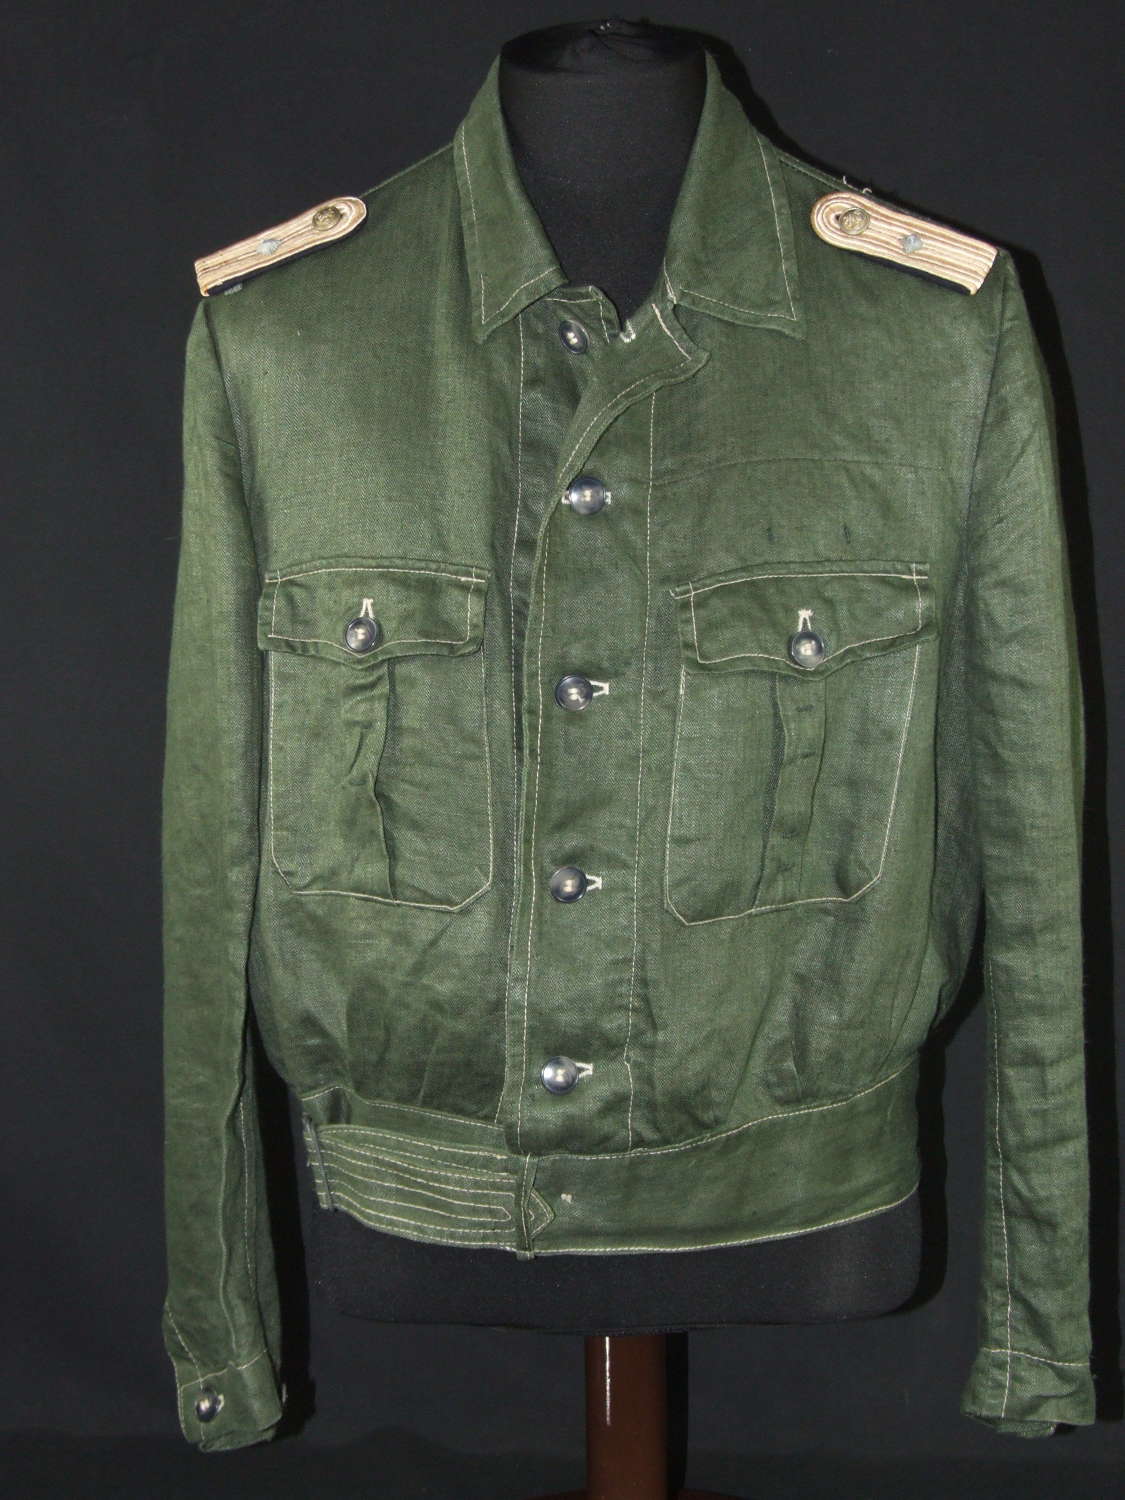 A Rare Original of the German Made U Boat Blouse - The Packchen